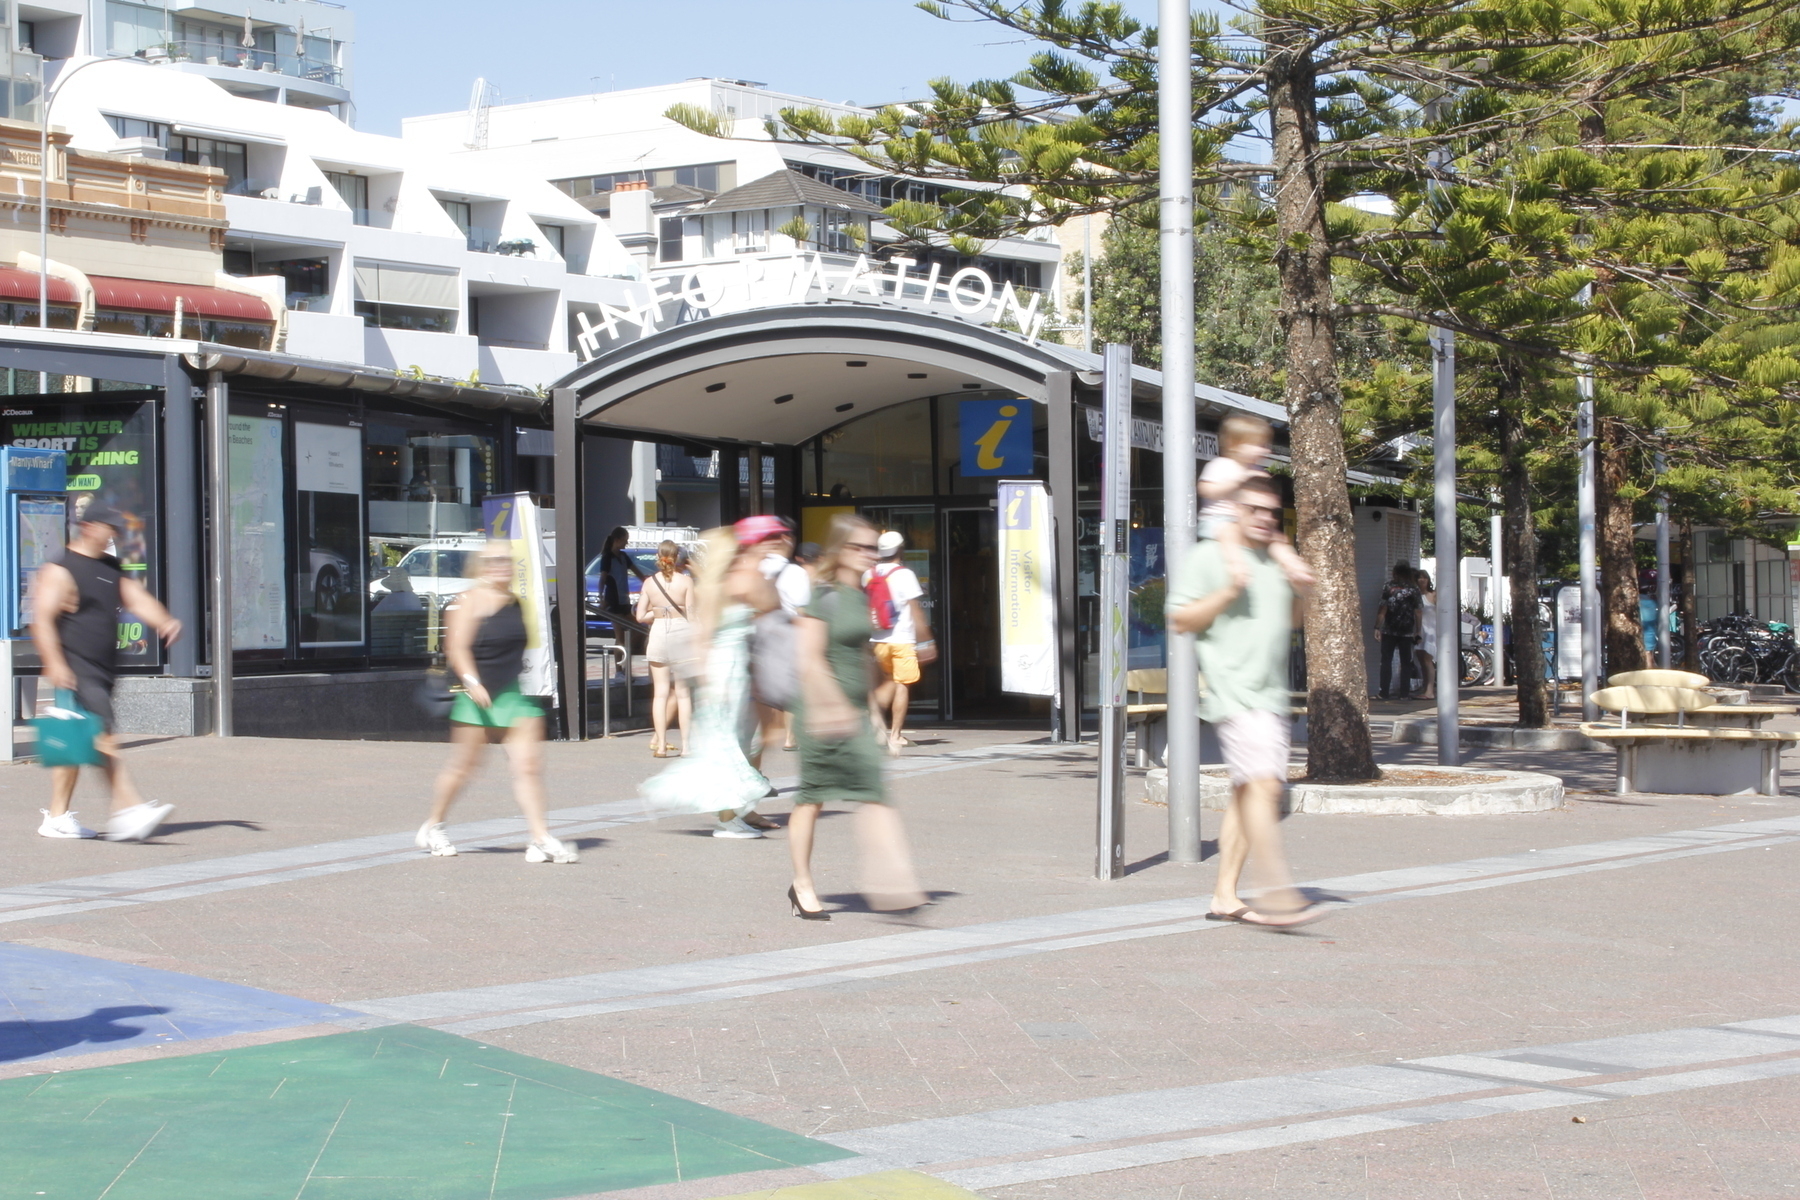 People walk from left to right across a sunlit plaza, looking blurred because the long exposure has captured their movement. One foot of each walking person is clear, not blurred, because that foot was not moving when the shutter opened. Everything else around the walkers is clear and in focus, like figures standing in the background, and an arched entrance saying Information.